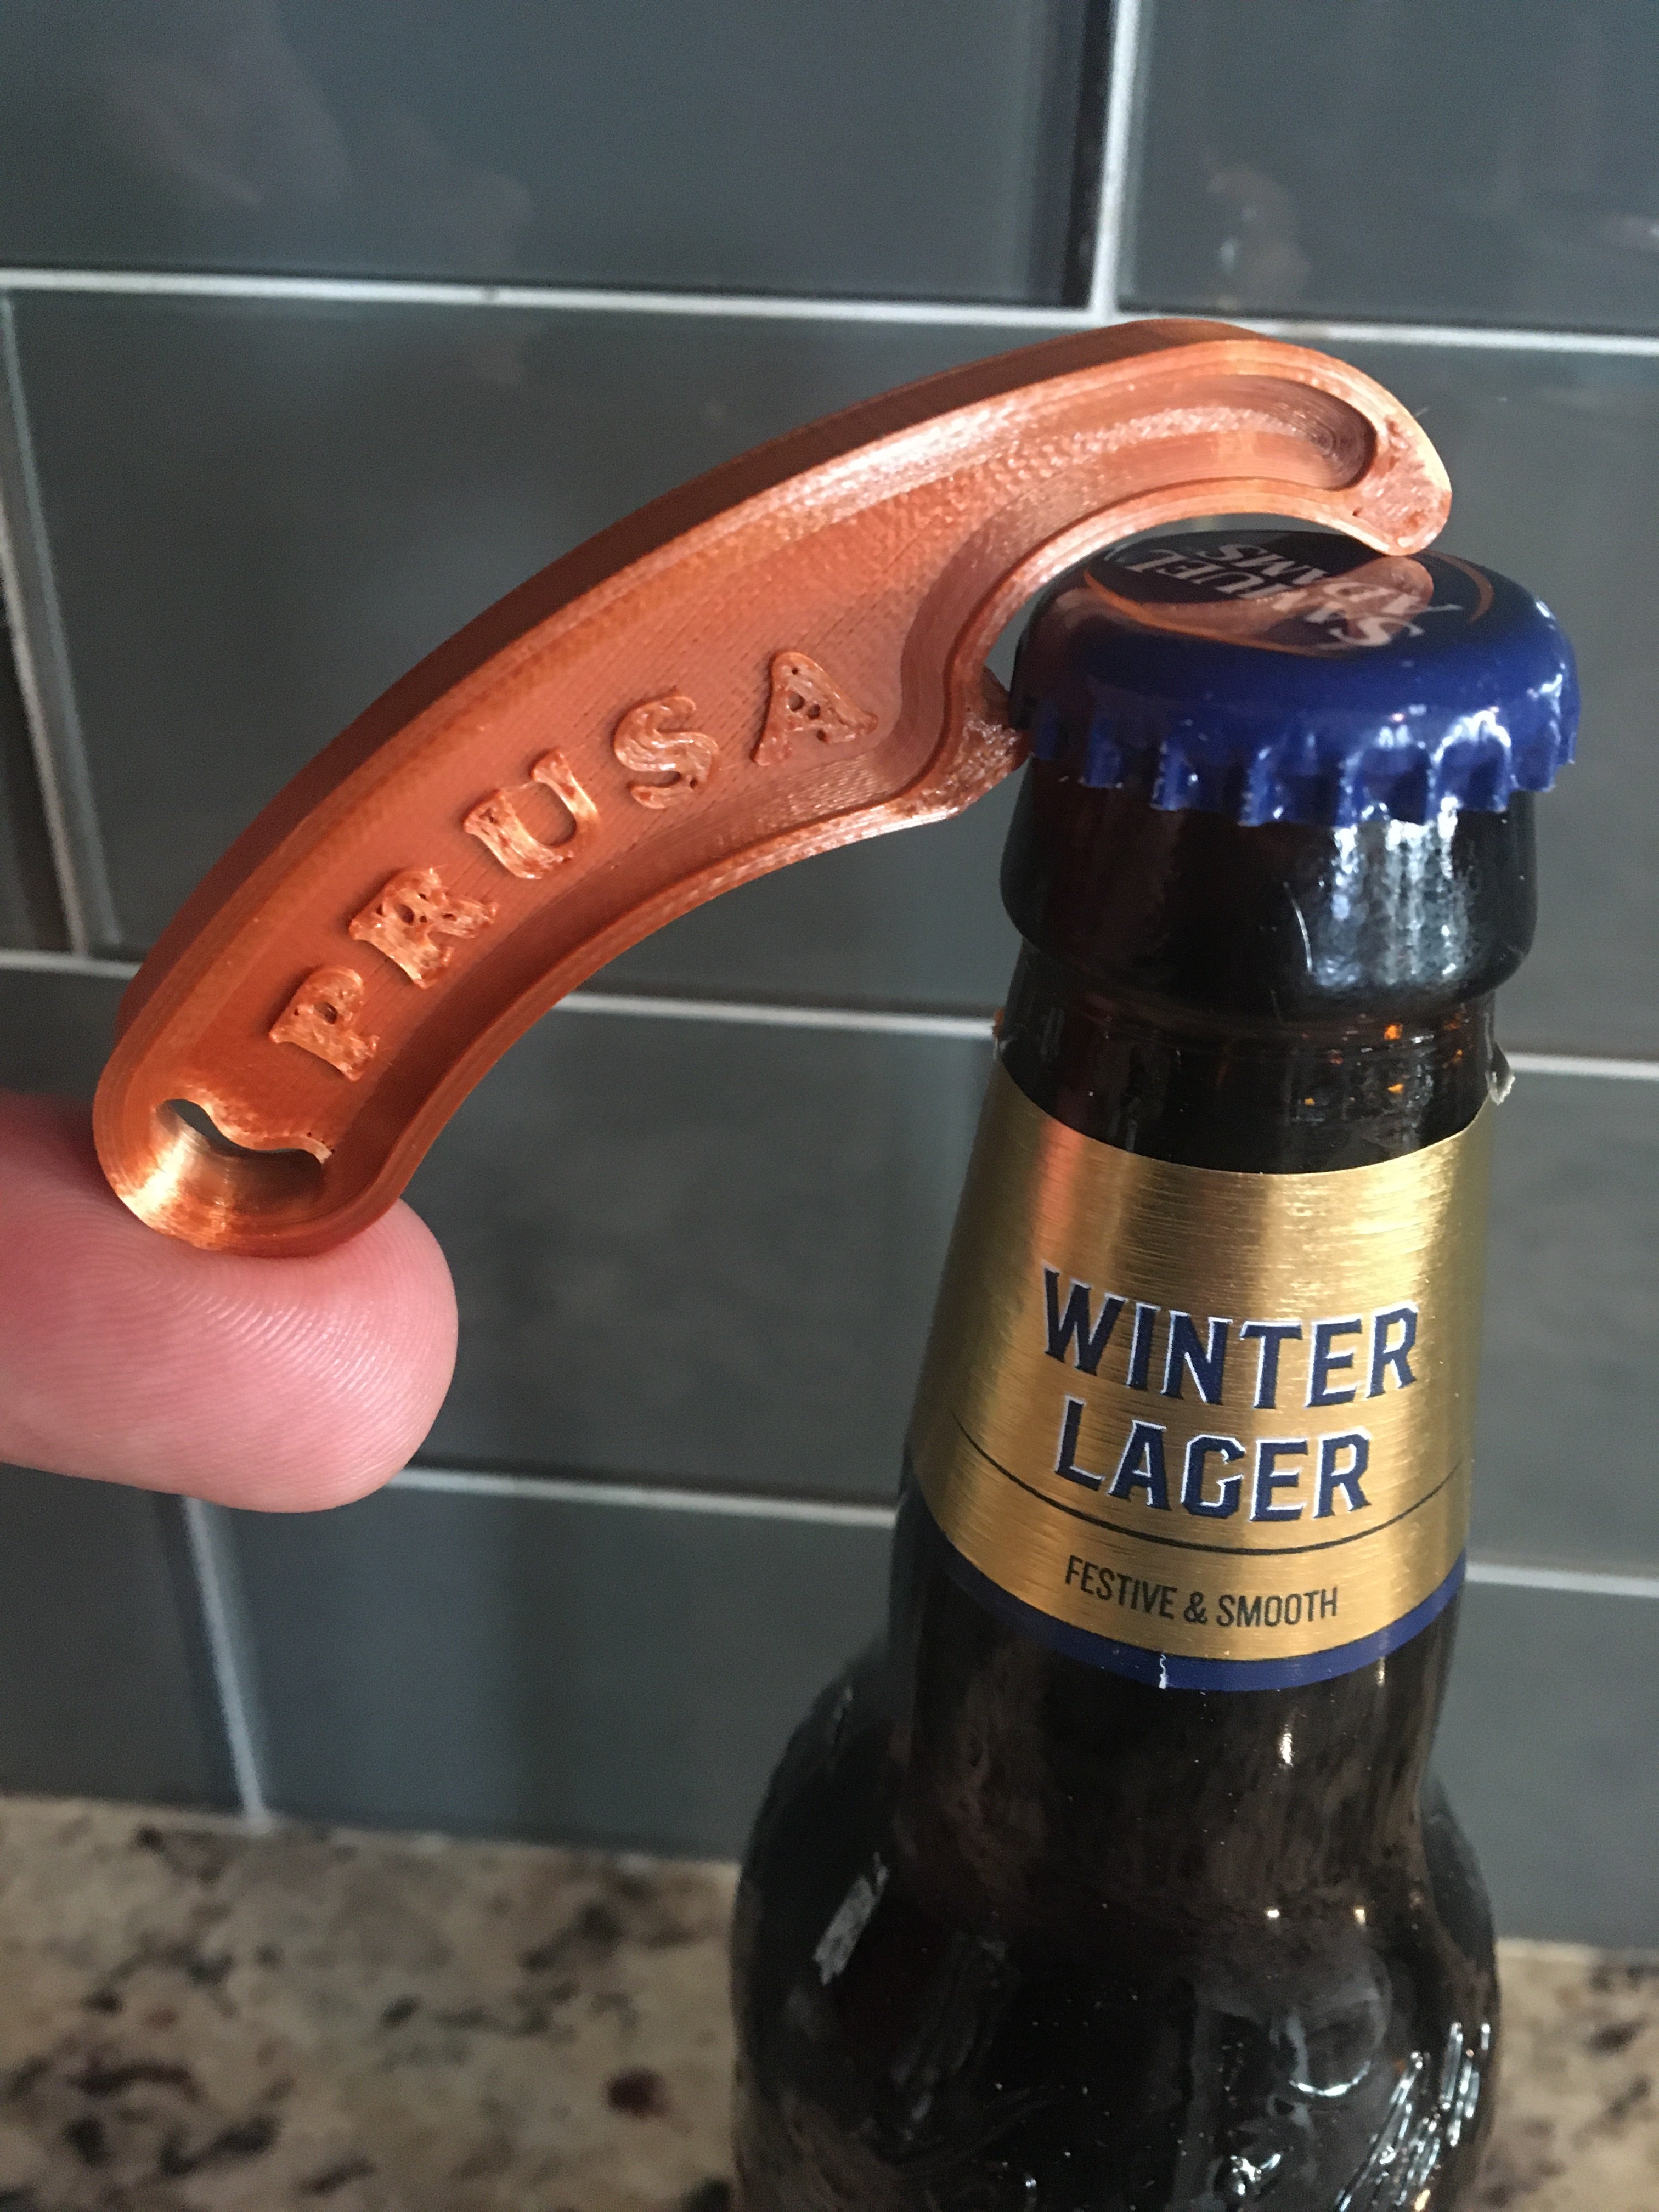 Durable and Personalised Bottle Opener with I-Beam Construction